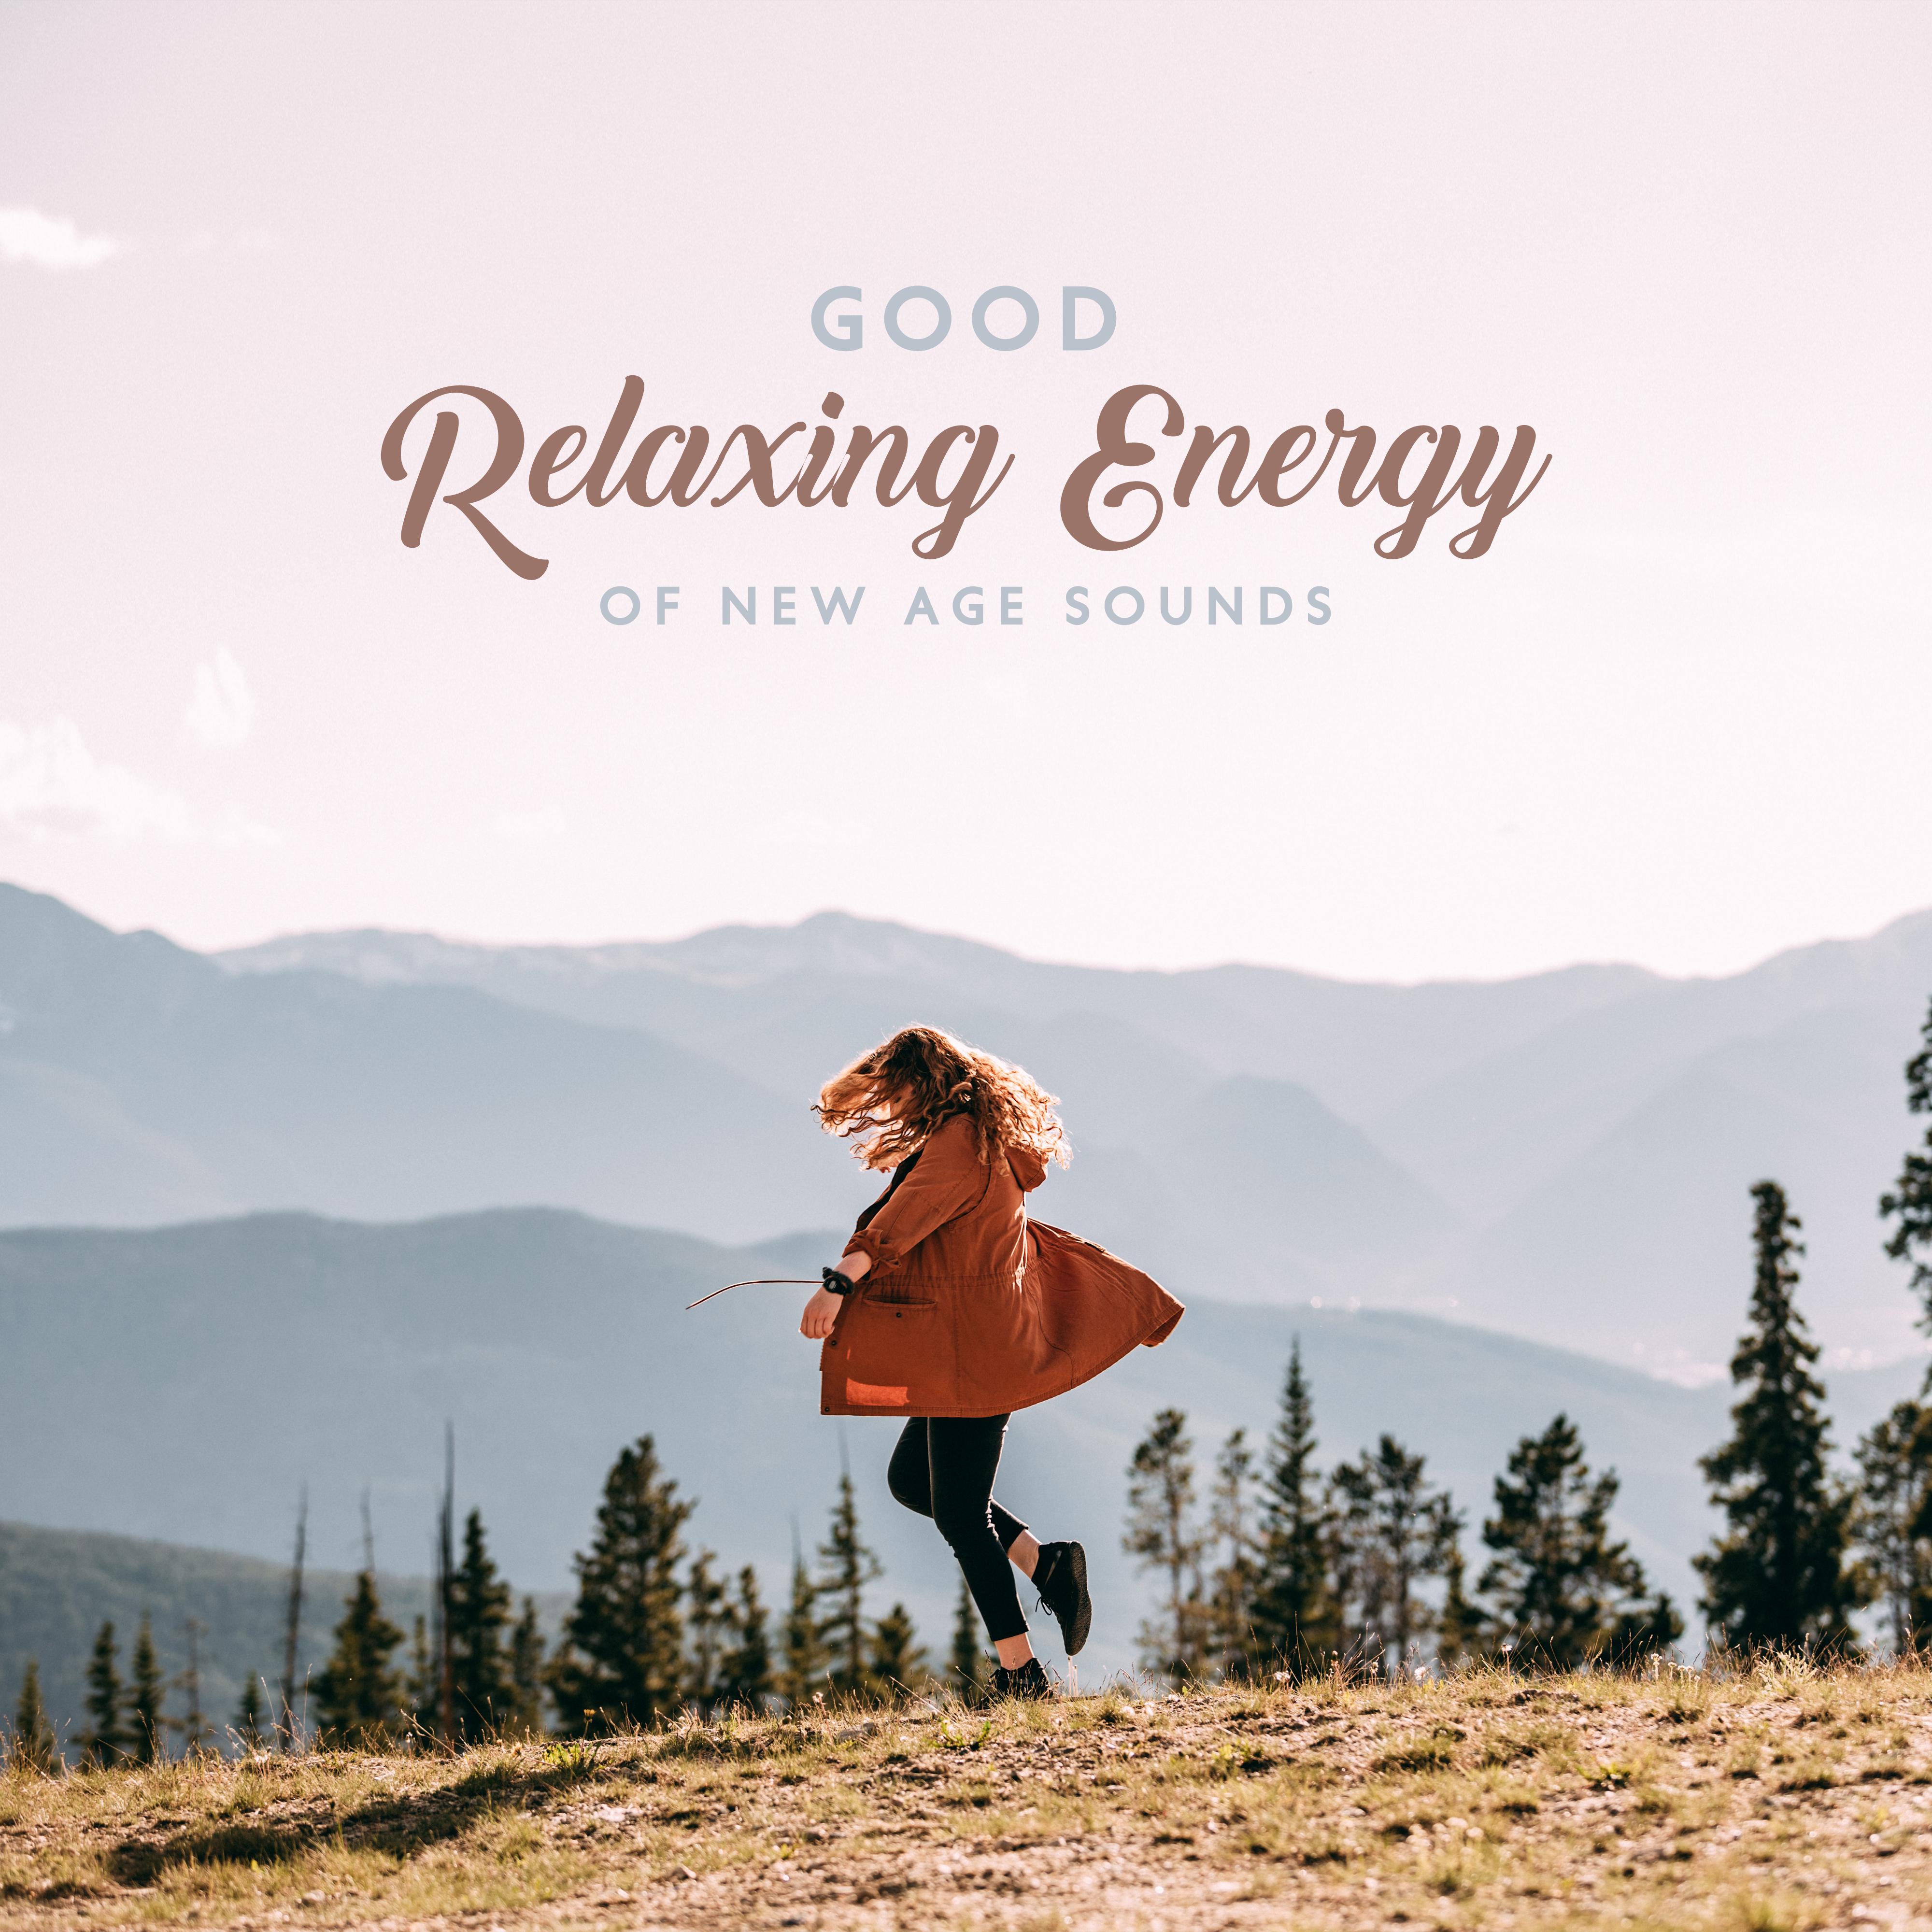 Good Relaxing Energy of New Age Sounds  2019 Fresh Ambient  Nature Music Selection for Best Relaxation, Calming Down, Stress Free, Afternoon Nap Rest